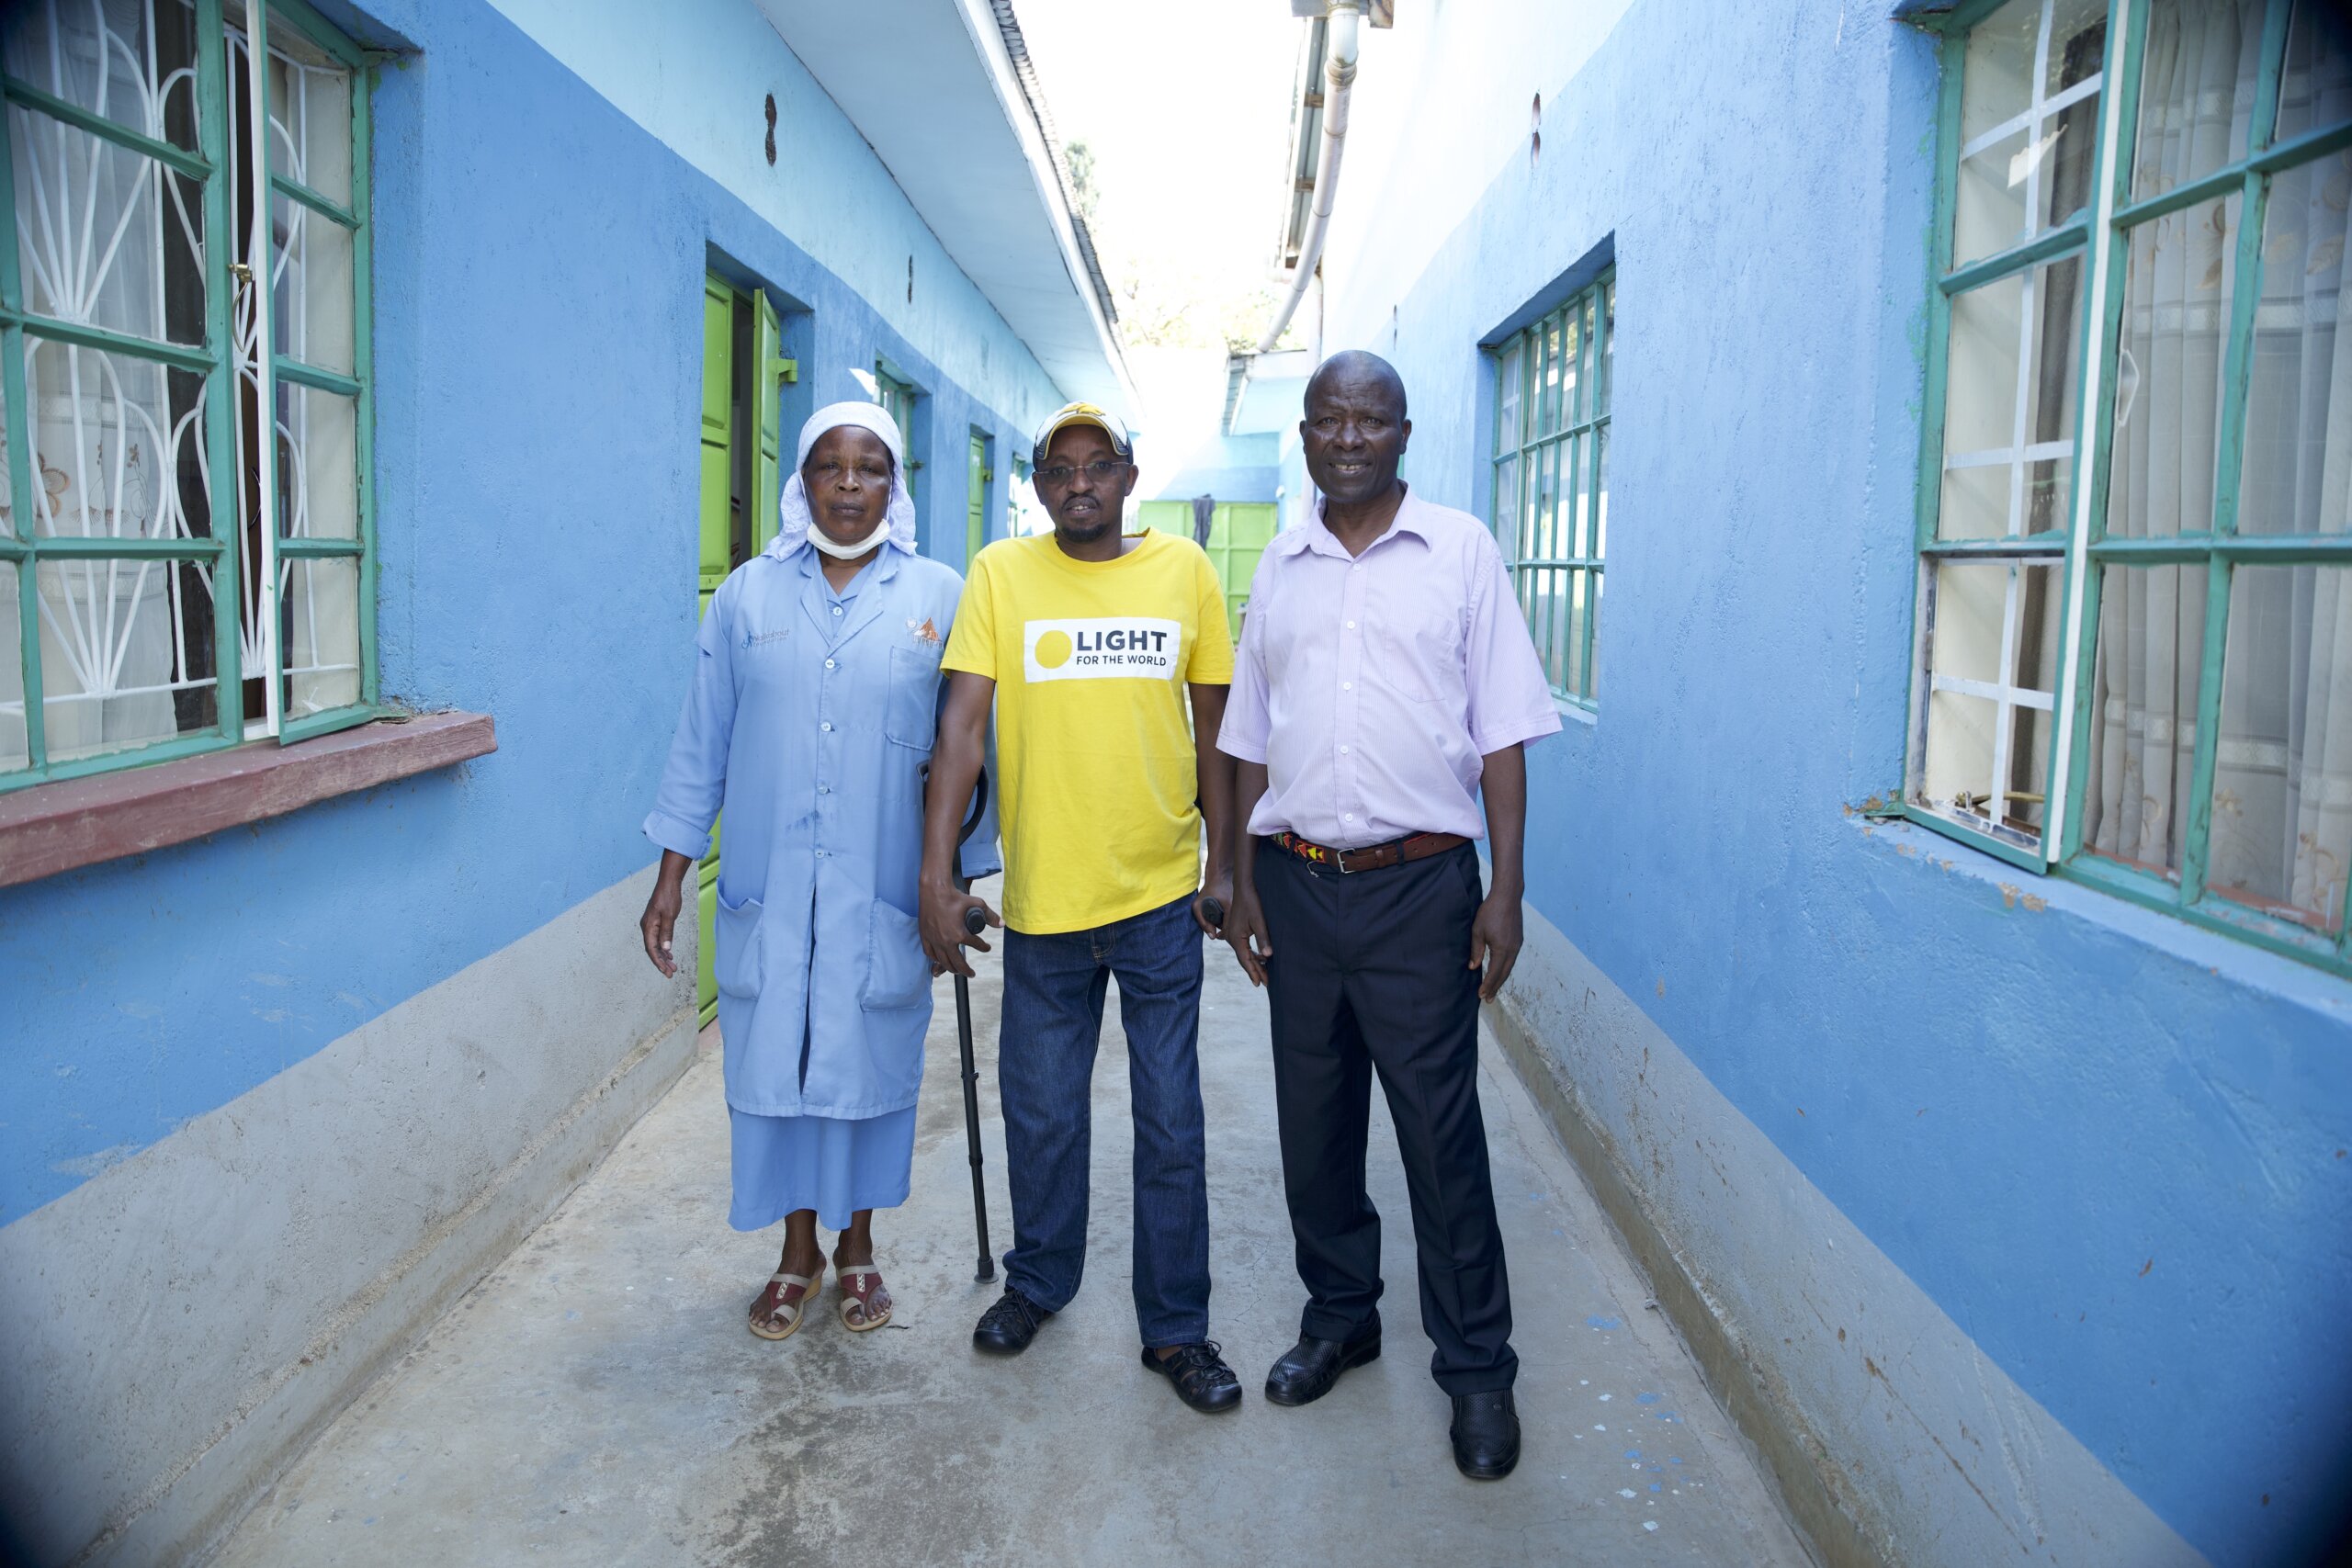 David Ndungu stands next to Peris and Stanley, both members of United Disabled People of Laikipia group. David is in the middle wearing a yellow Light for the World t-shirt and hat. A woman on his left wears a long light blue coat and skirt, and a white head scarf. The man on the right wears a pale shirt and dark trousers. The stand outside in front of bright blue walls.